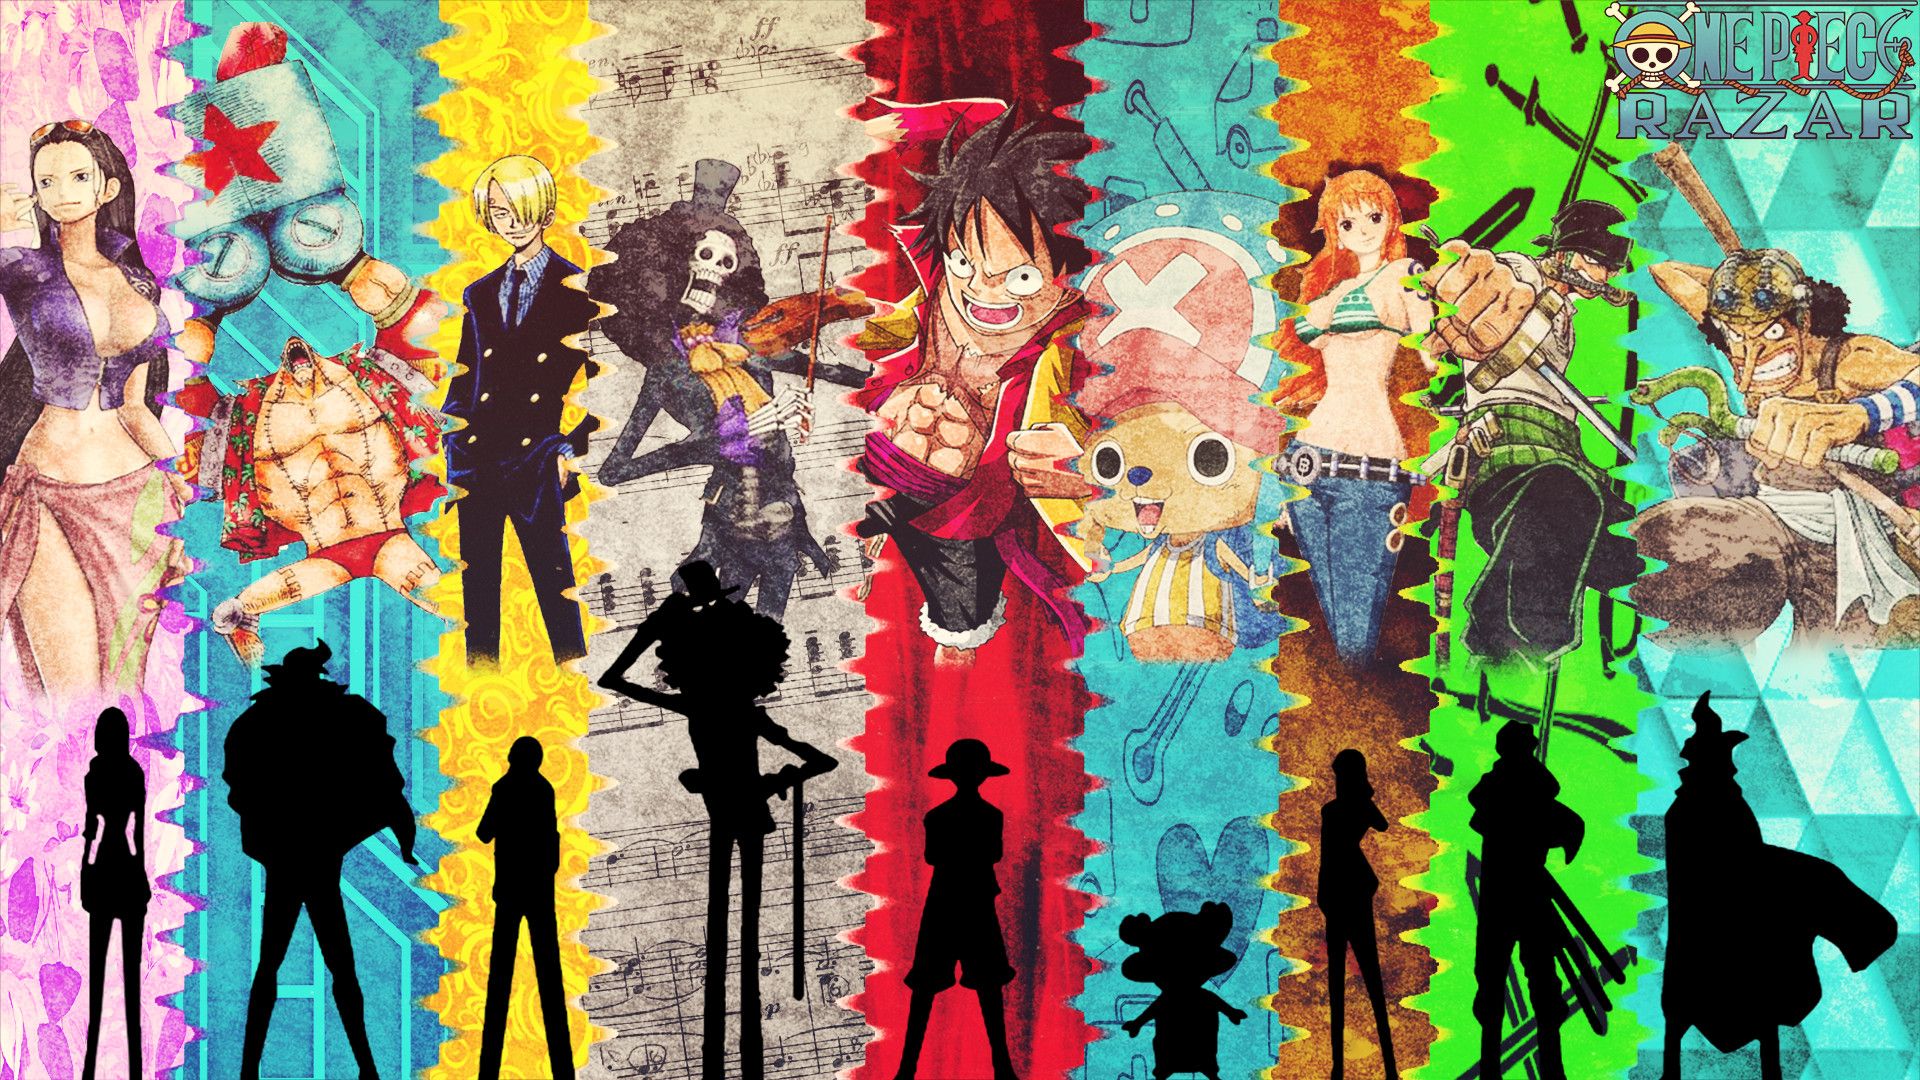 80 One Piece Wallpapers On Wallpaperplay Data-src - One Piece Wallpaper Hd  - 1920x1080 Wallpaper 